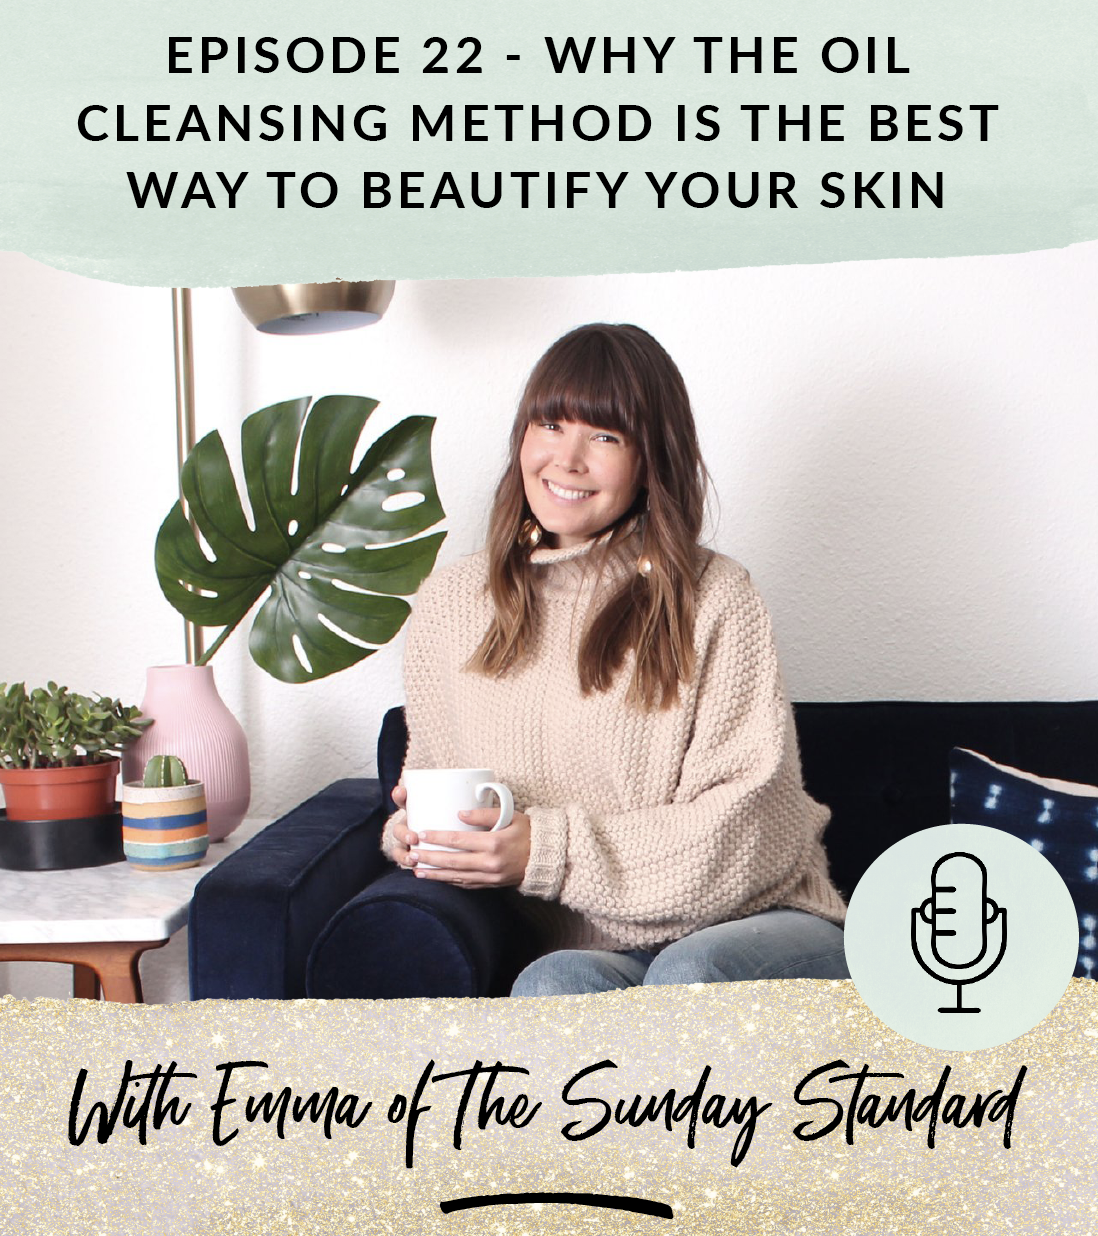 Why the oil cleansing method is the best way to beautify your skin episode 22 of The Positively Green Podcast